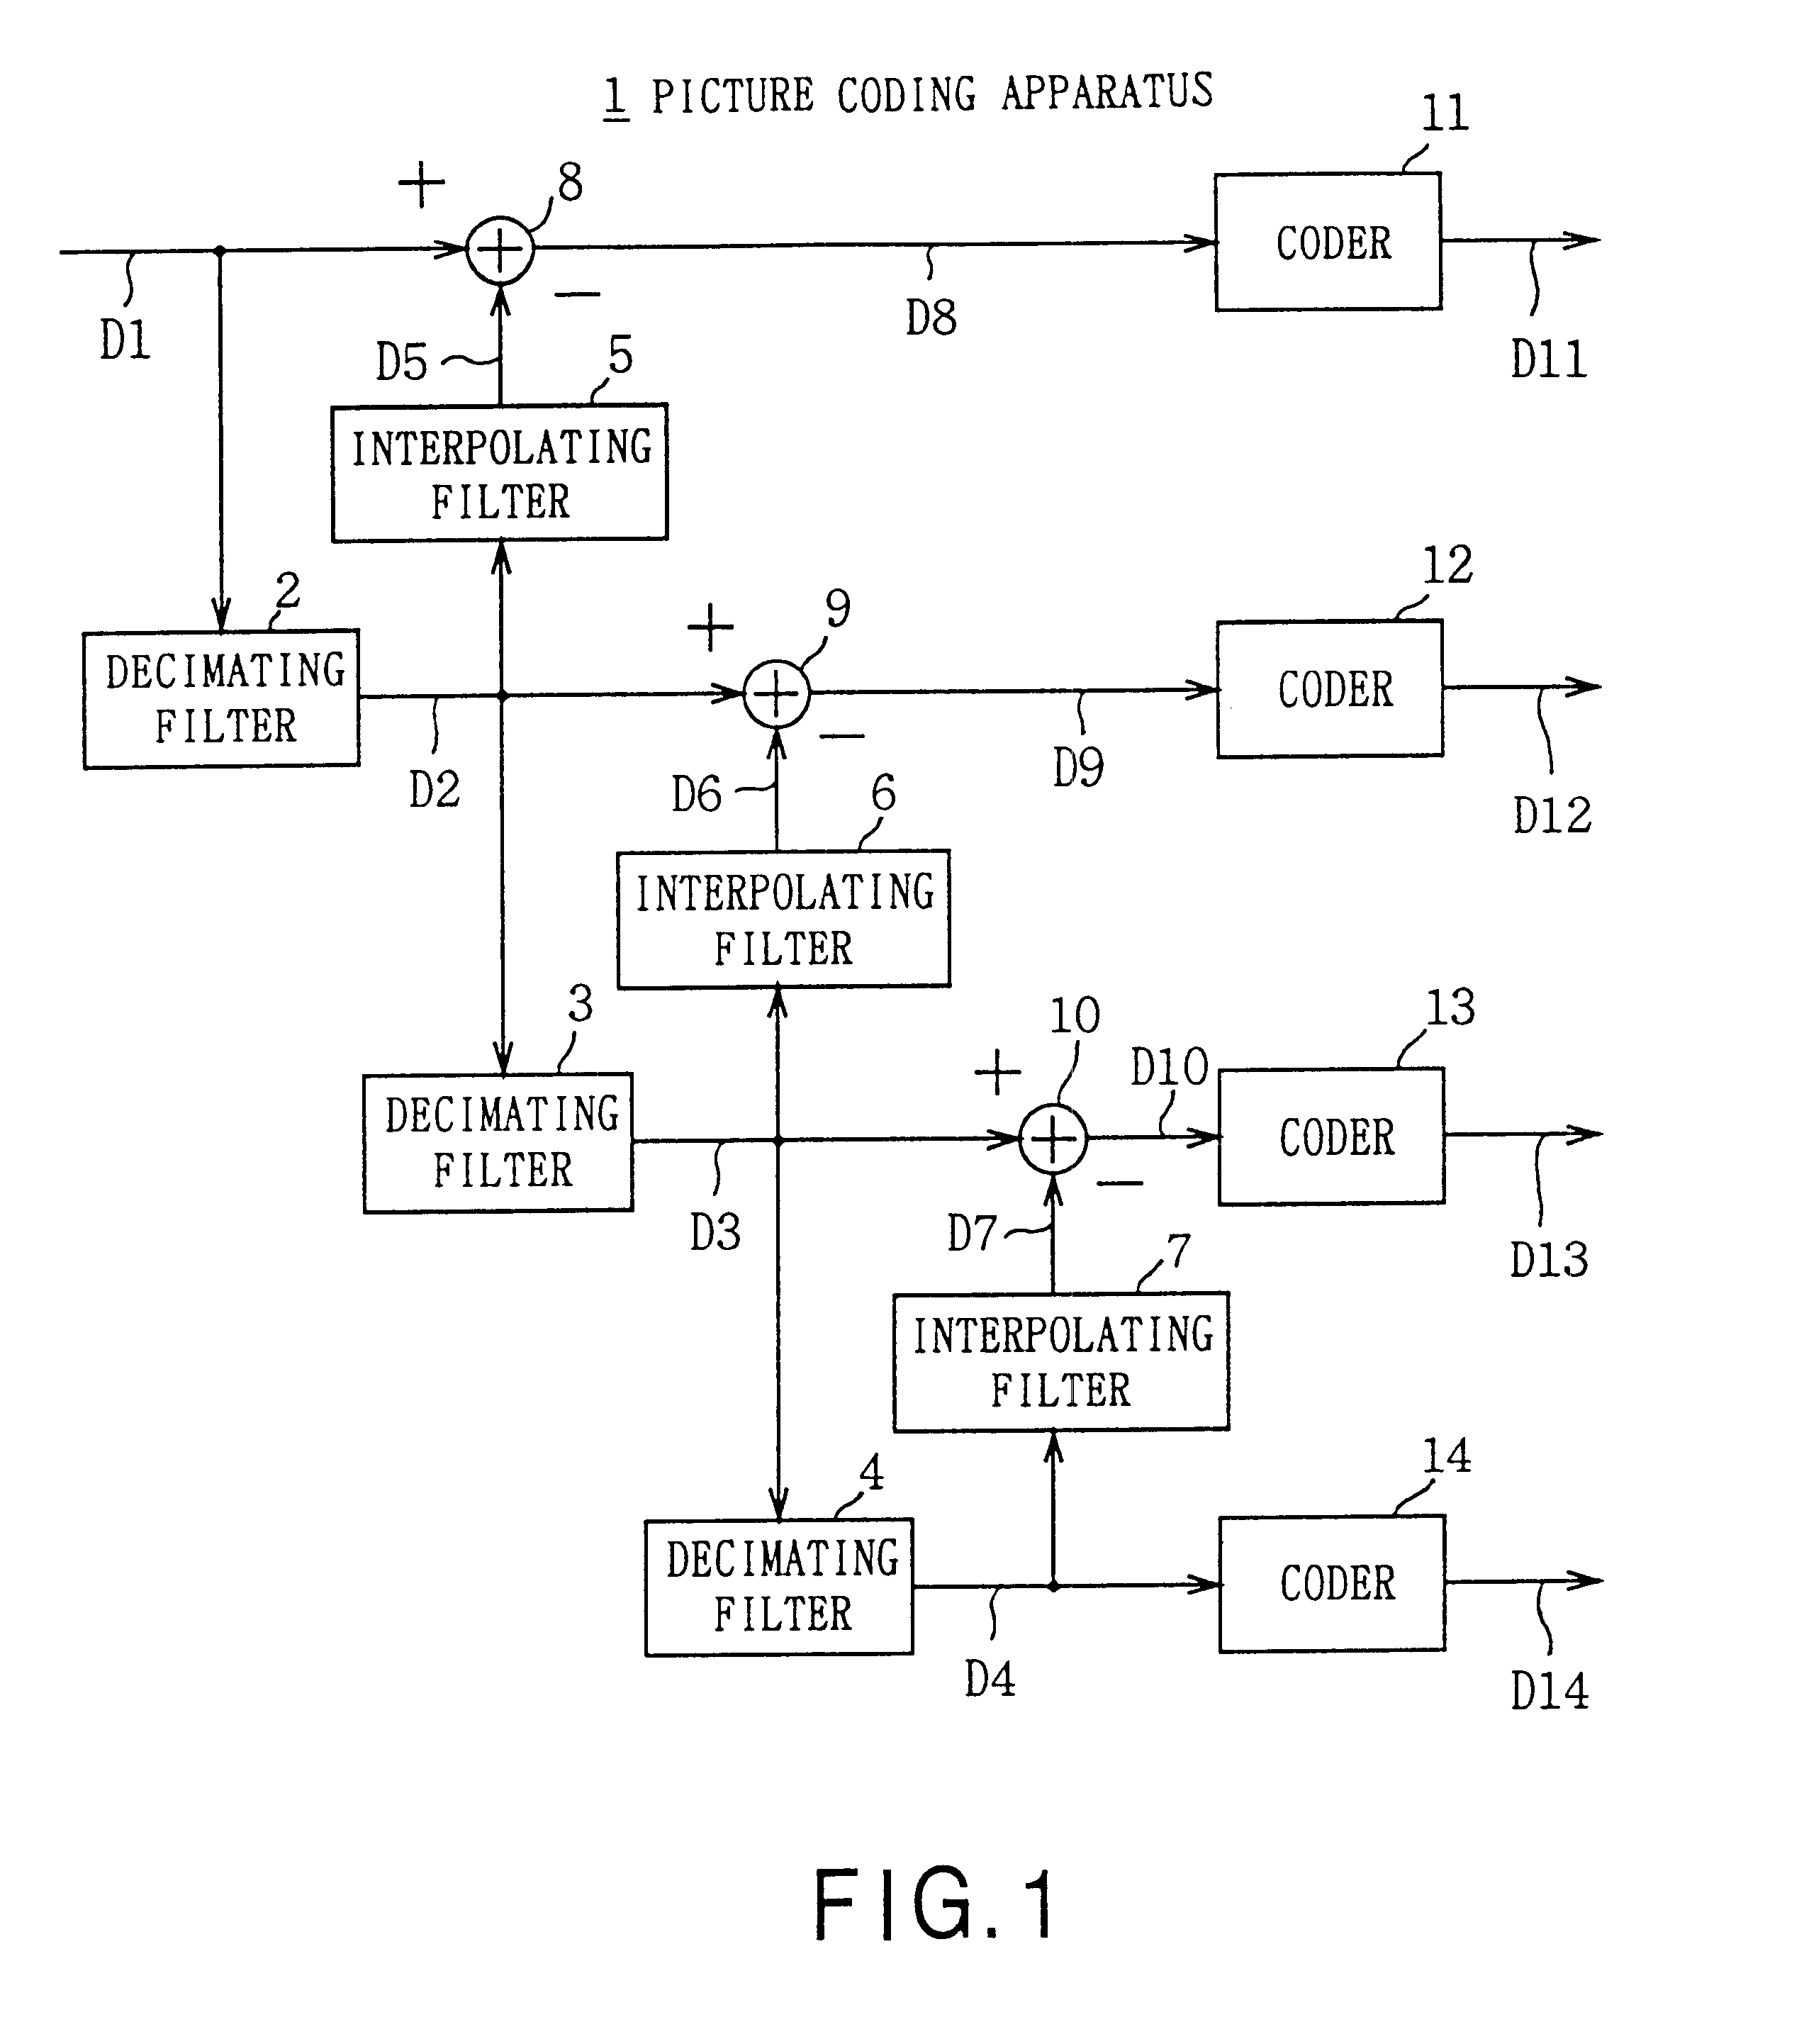 Picture coding apparatus and method thereof